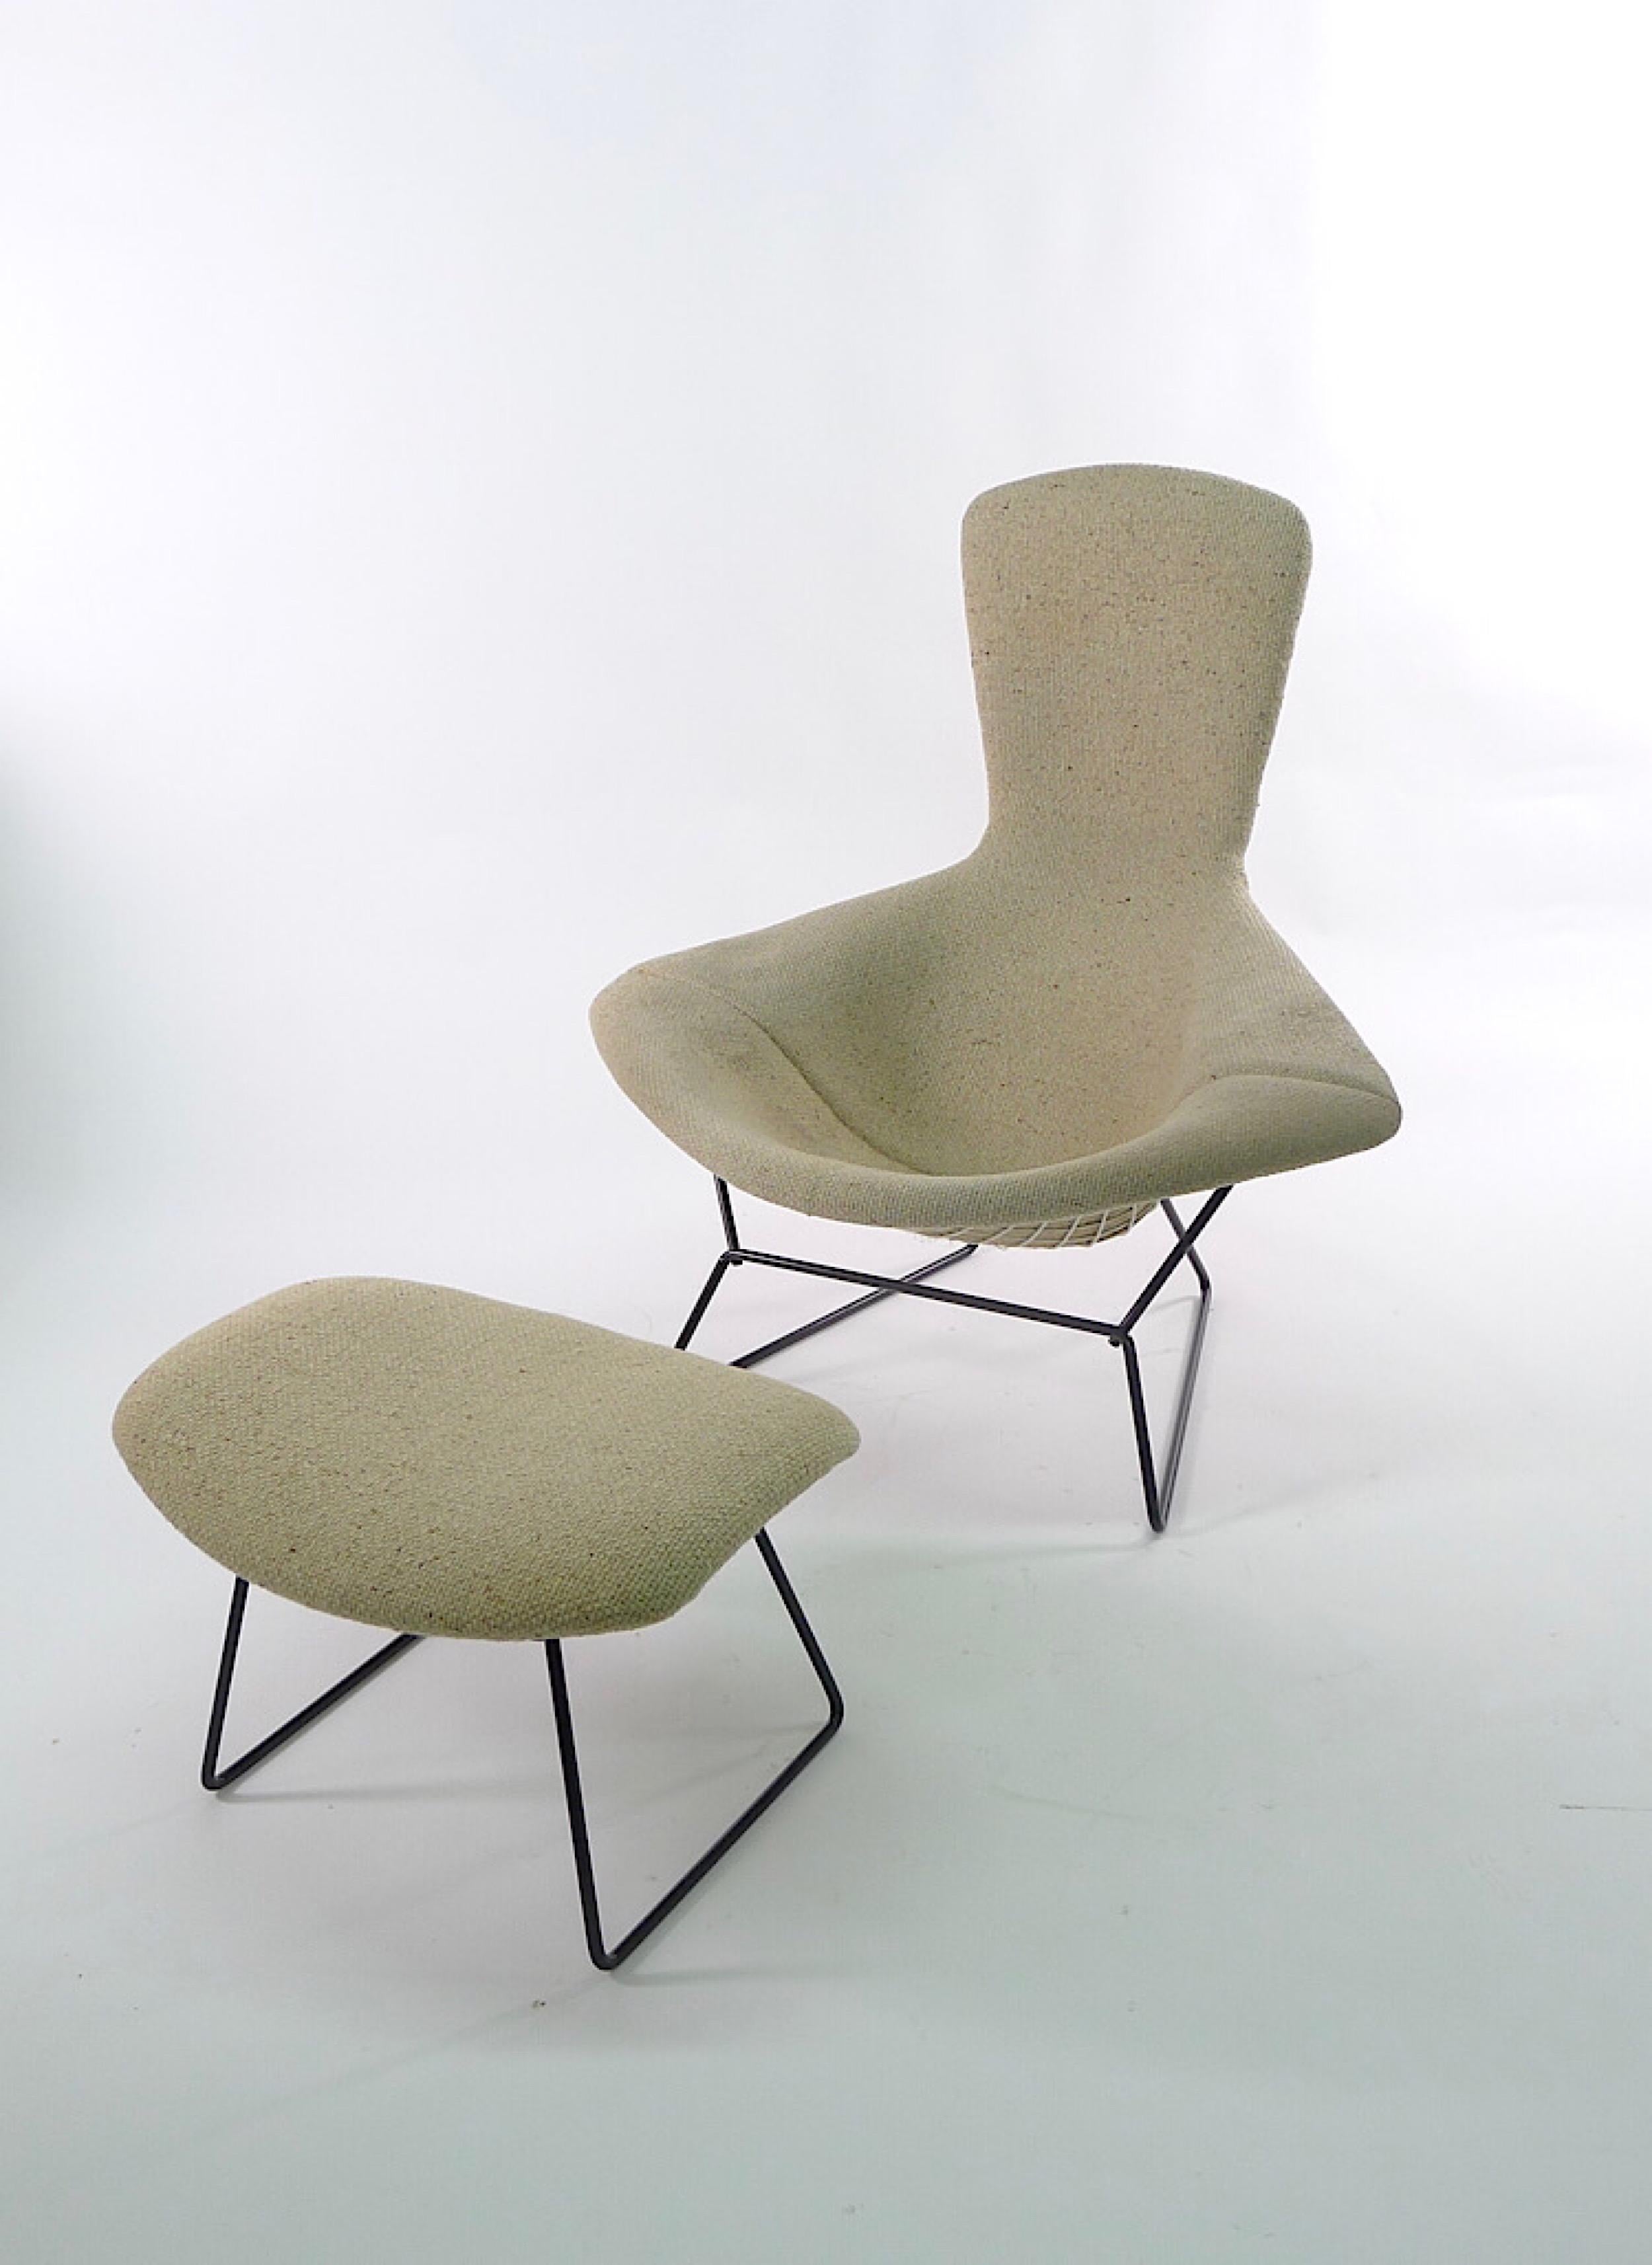 American Harry Bertoia Bird Chair and Ottoman, 1st Series, Made by Knoll International